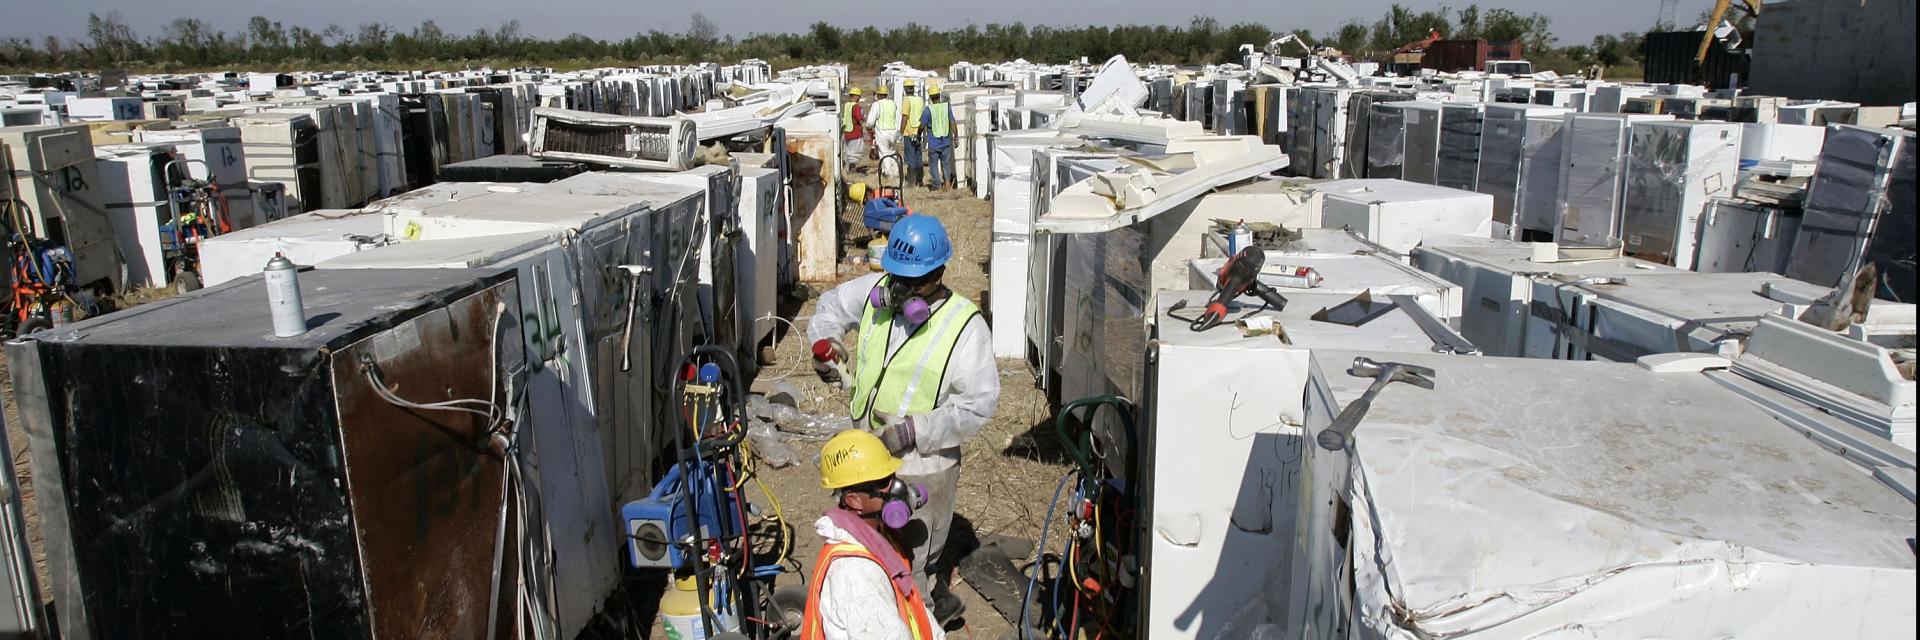 EPA workers prepare to remove freon, compressor oil, mercury switches, and rotten food from refrigerators and other "white goods" at the Katrina Dumpsite on October 19, 2005, in New Orleans, Louisiana.